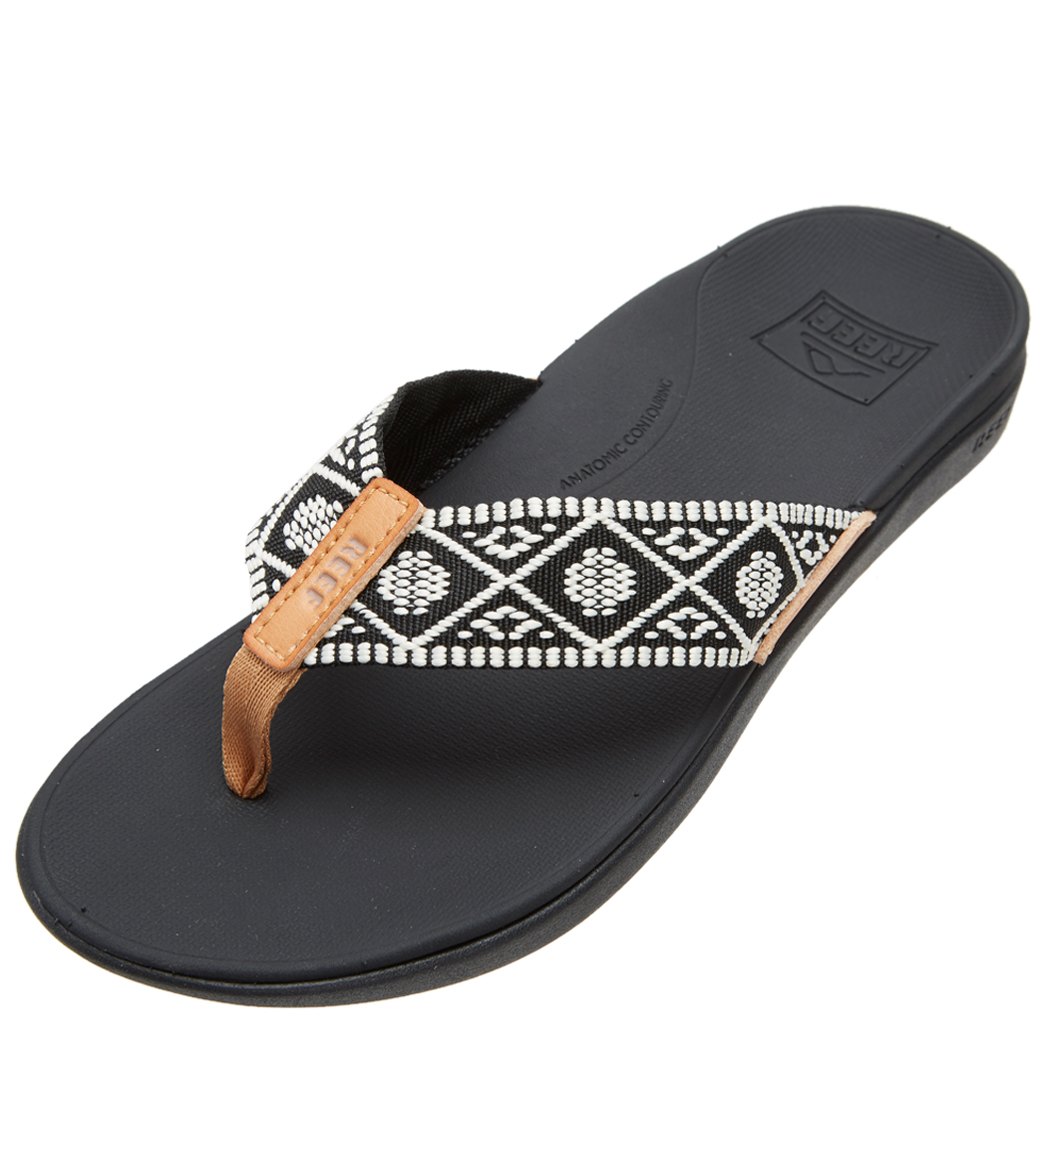 Reef Ortho-Bounce Woven Flip Flop - Black/White 6 - Swimoutlet.com